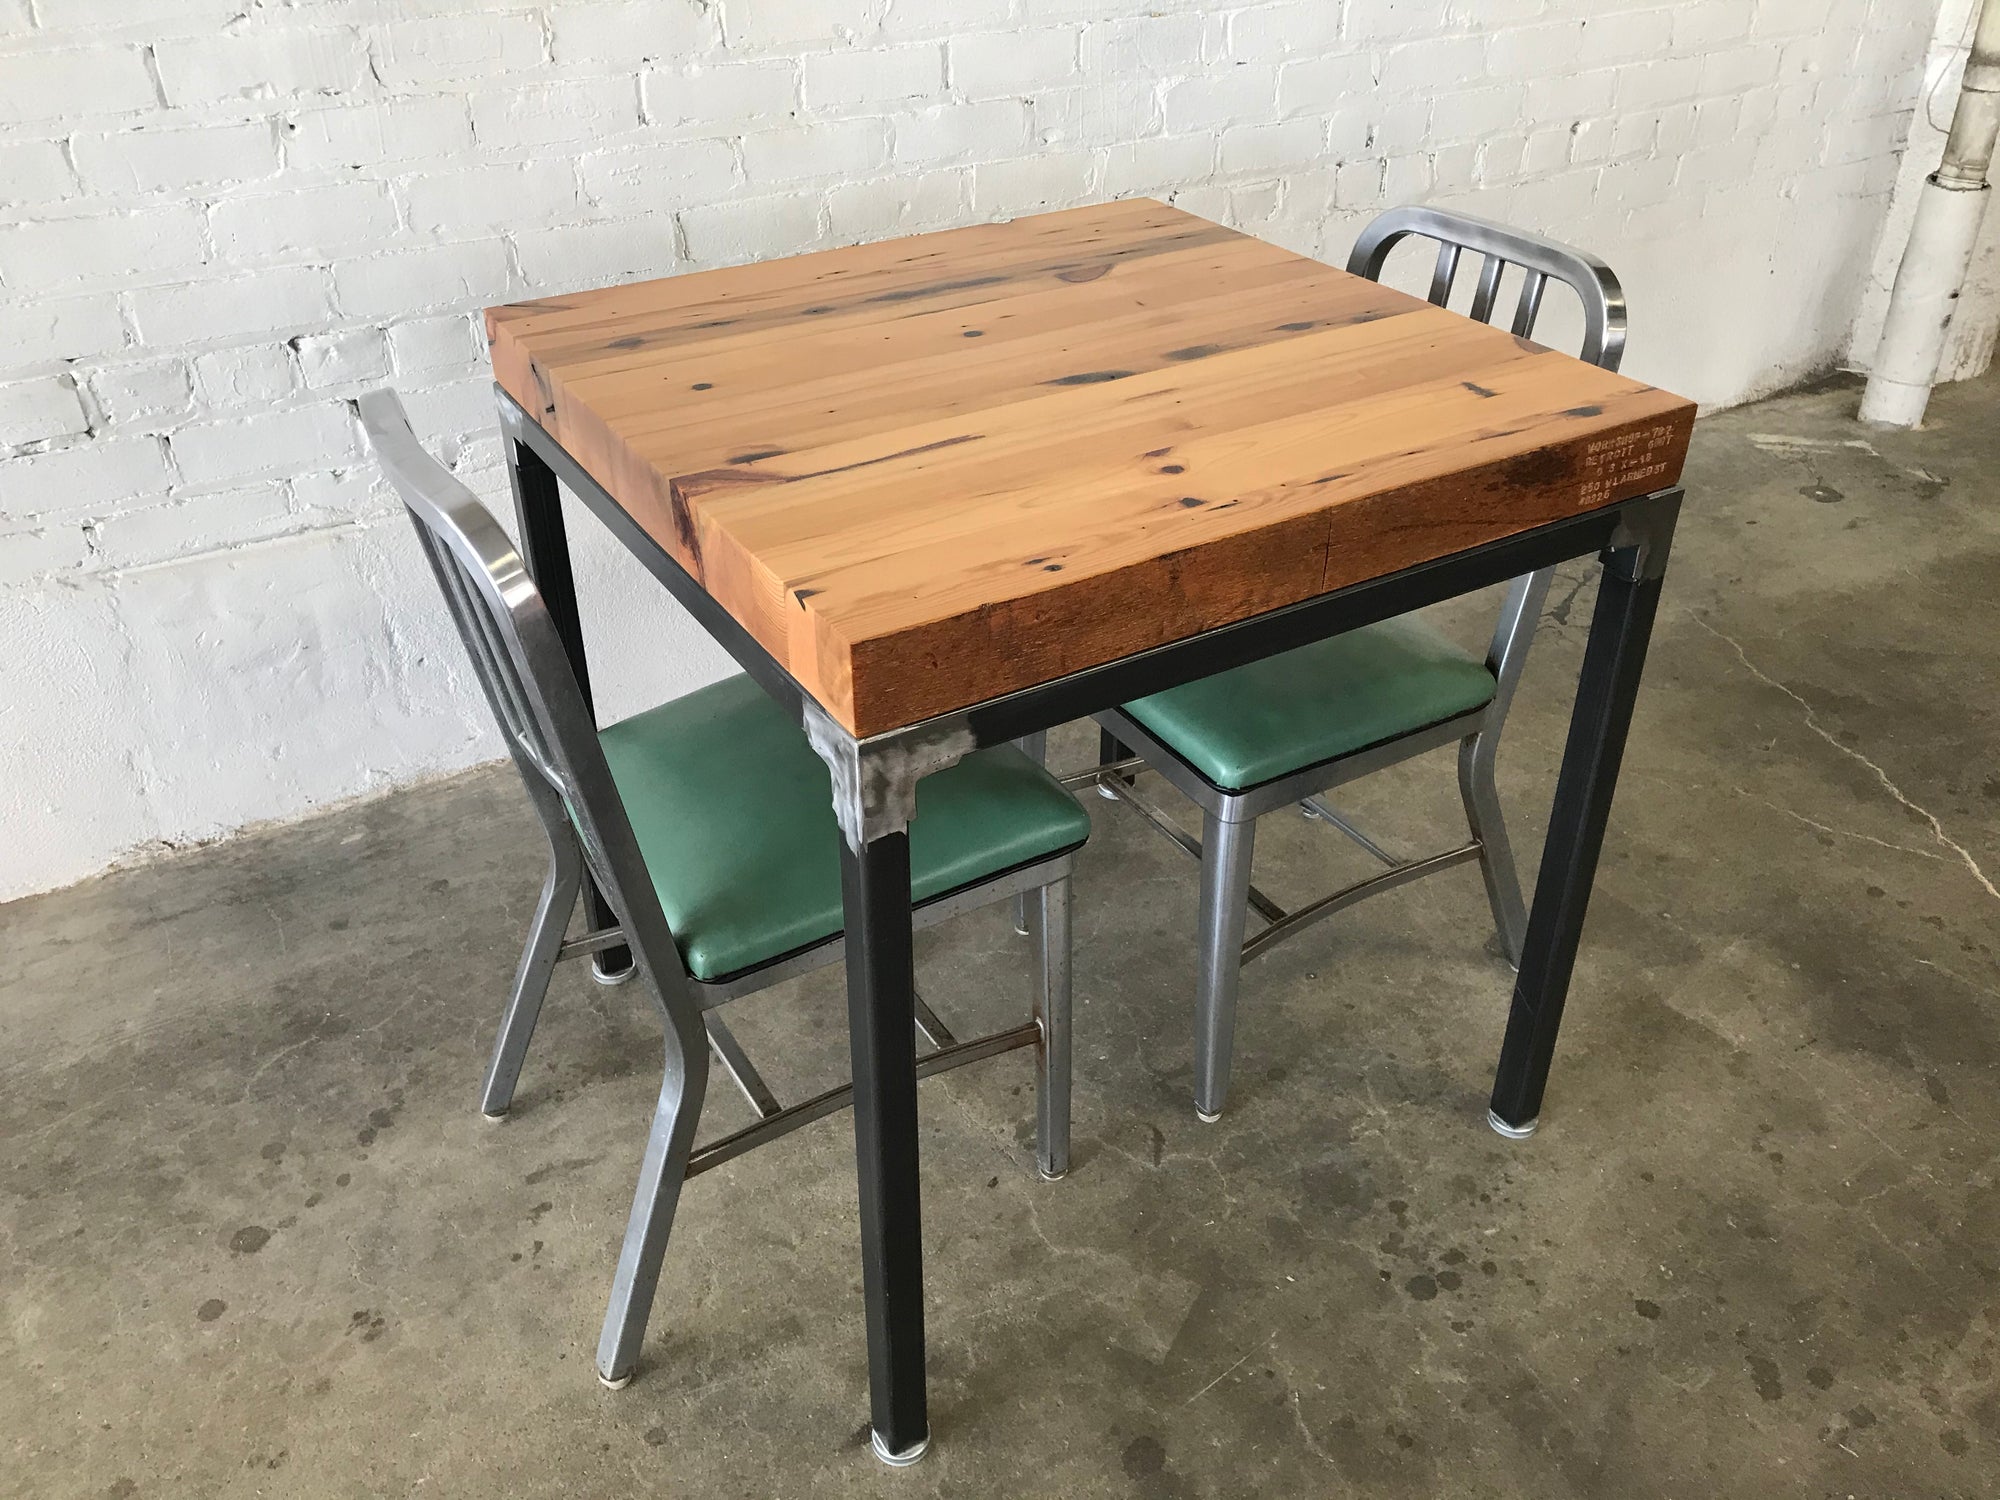 Grand Boulevard Industrial Reclaimed Wood Cafe Table